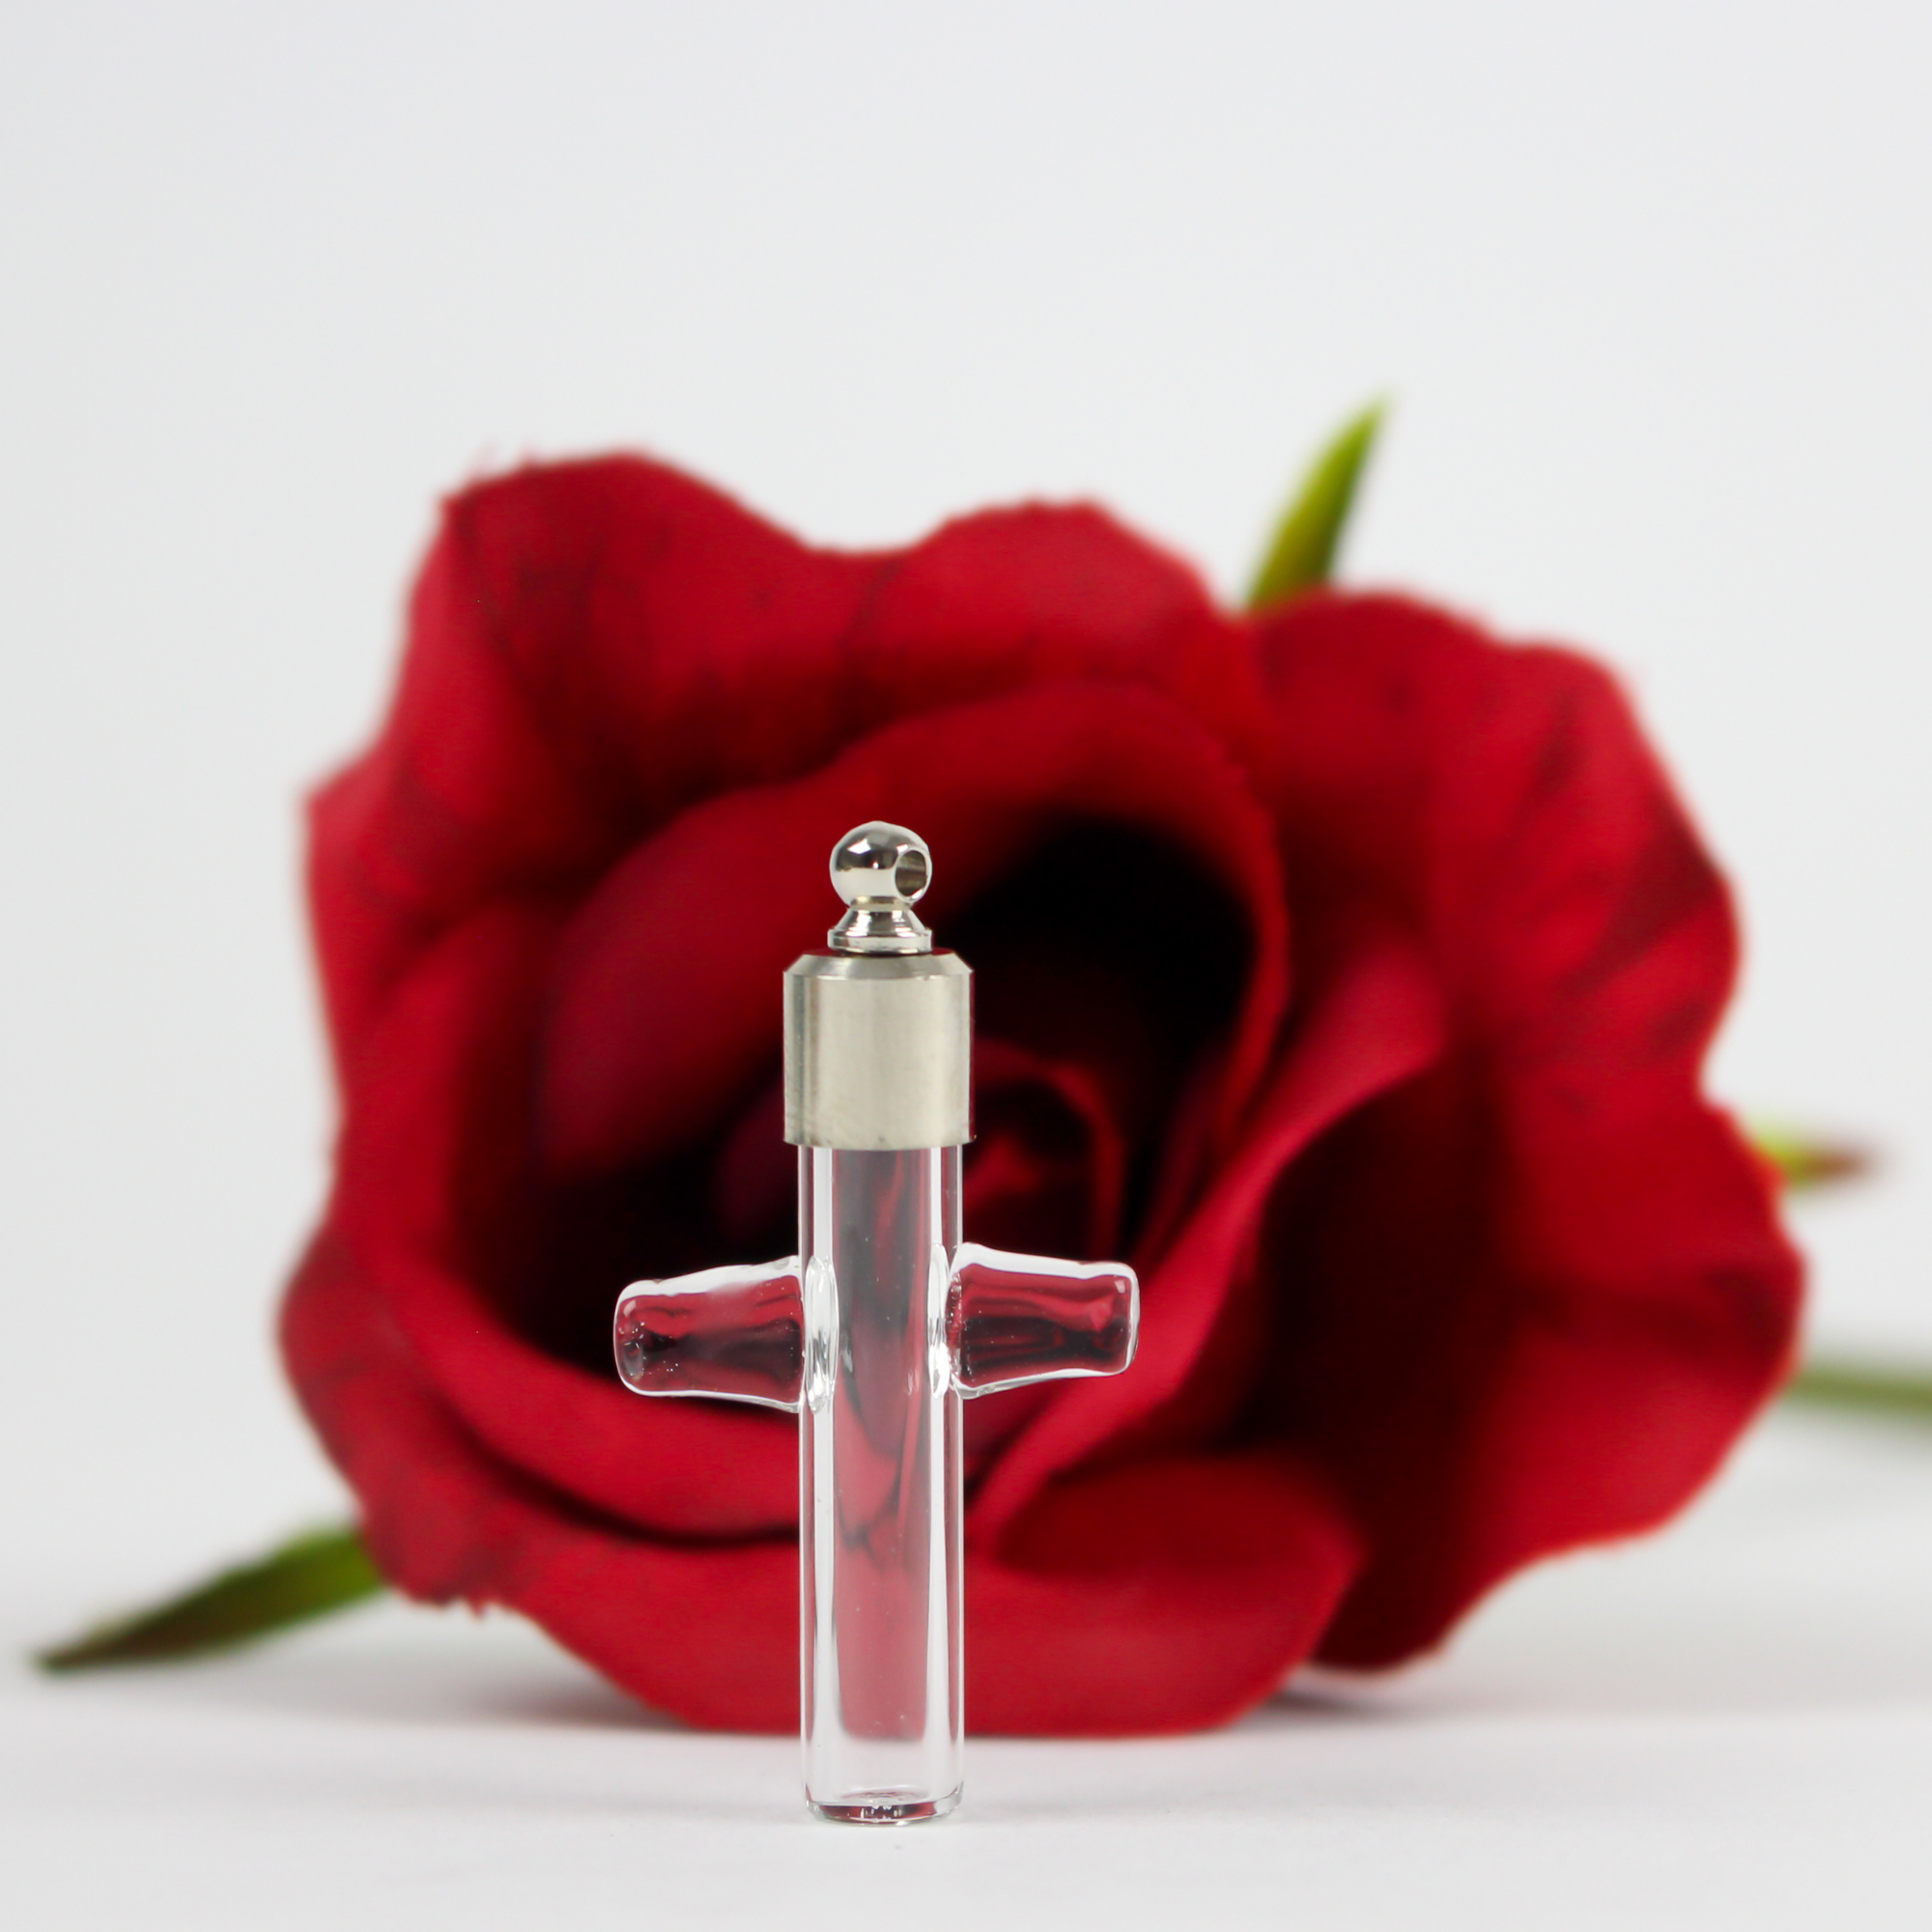 Small glass vial shaped like a cross. You can use it to hold a small amount of holy water or ashes of a loved one